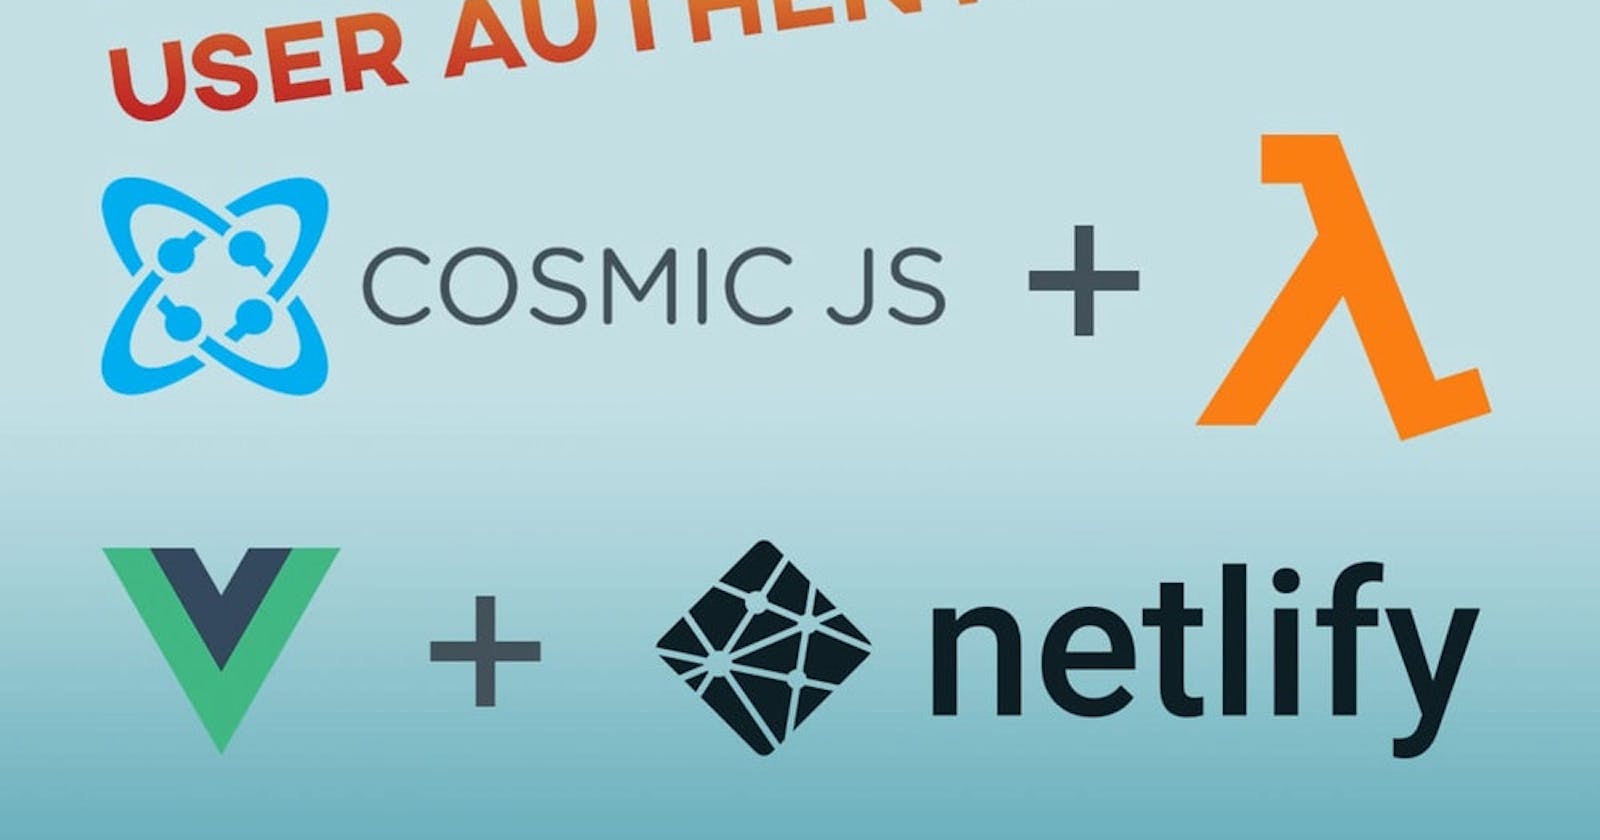 How to Build an Authentication App using Cosmic JS, Vue.js, and Lambda